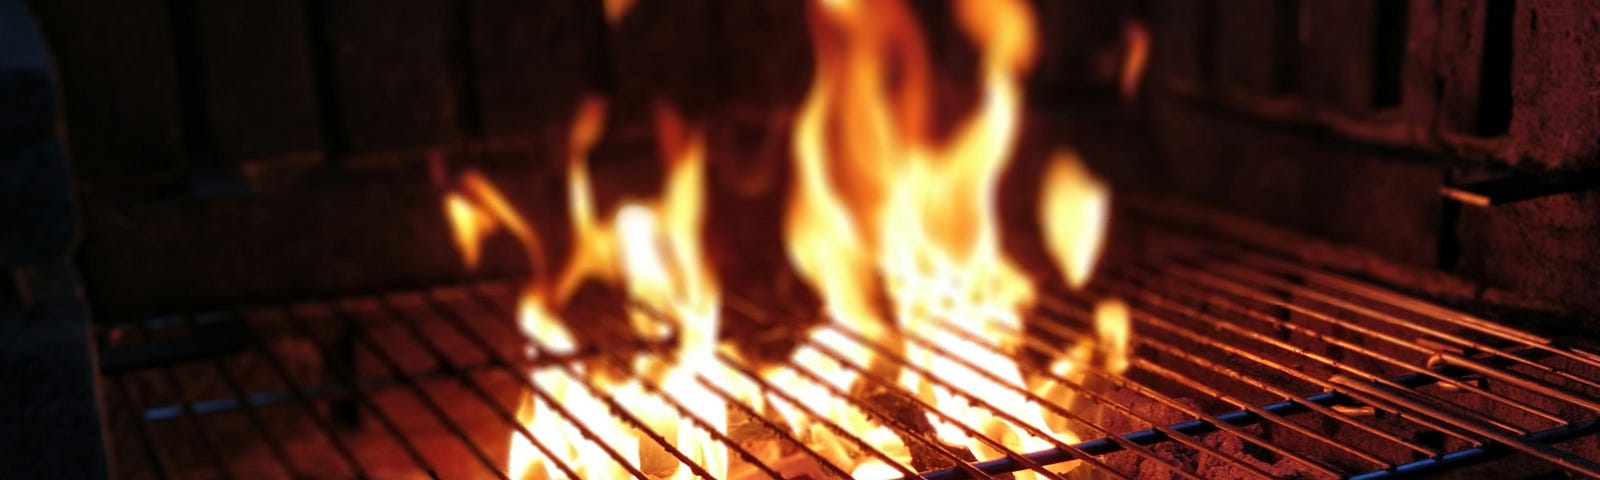 Large grill over an open flame